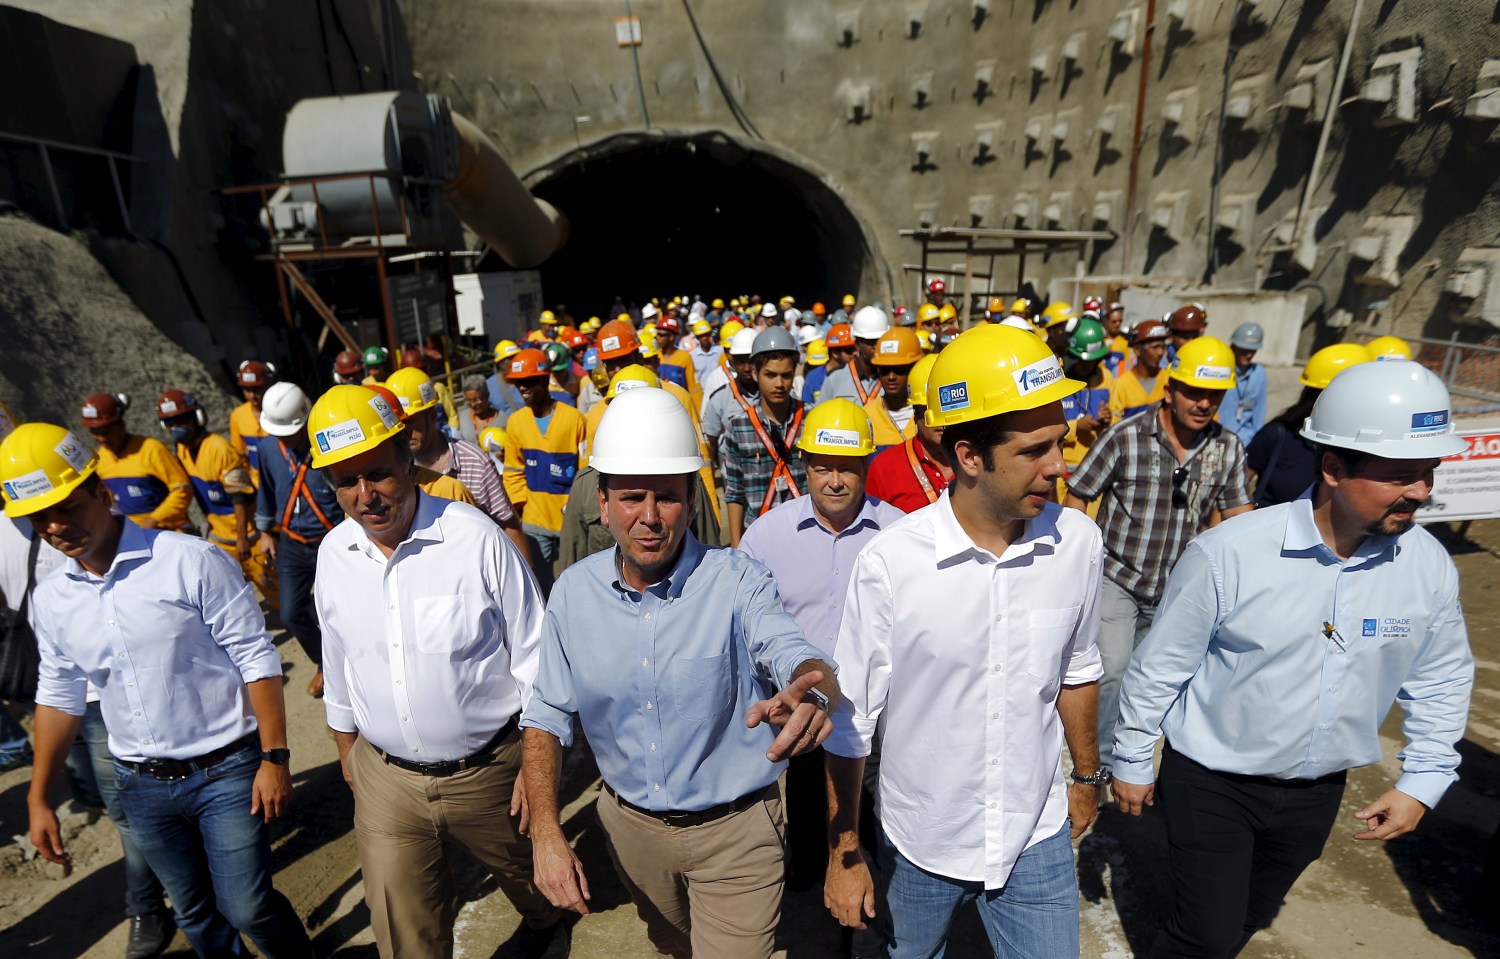 Rio de Janeiro's Mayor Eduardo Paes (C) and Rio de Janeiro's Governor Luiz Fernando Pezao (2nd L) leave one of the two tunnels on the Transolimpica freeway route, which will connect the Rio 2016 Olympic Park and the Deodoro Sports Complex, in Rio de Janeiro, Brazil August 4, 2015. The transportation project is being carried out for the city's redevelopment ahead of the 2016 Olympic Games. REUTERS/Ricardo Moraes - RTX1N13J